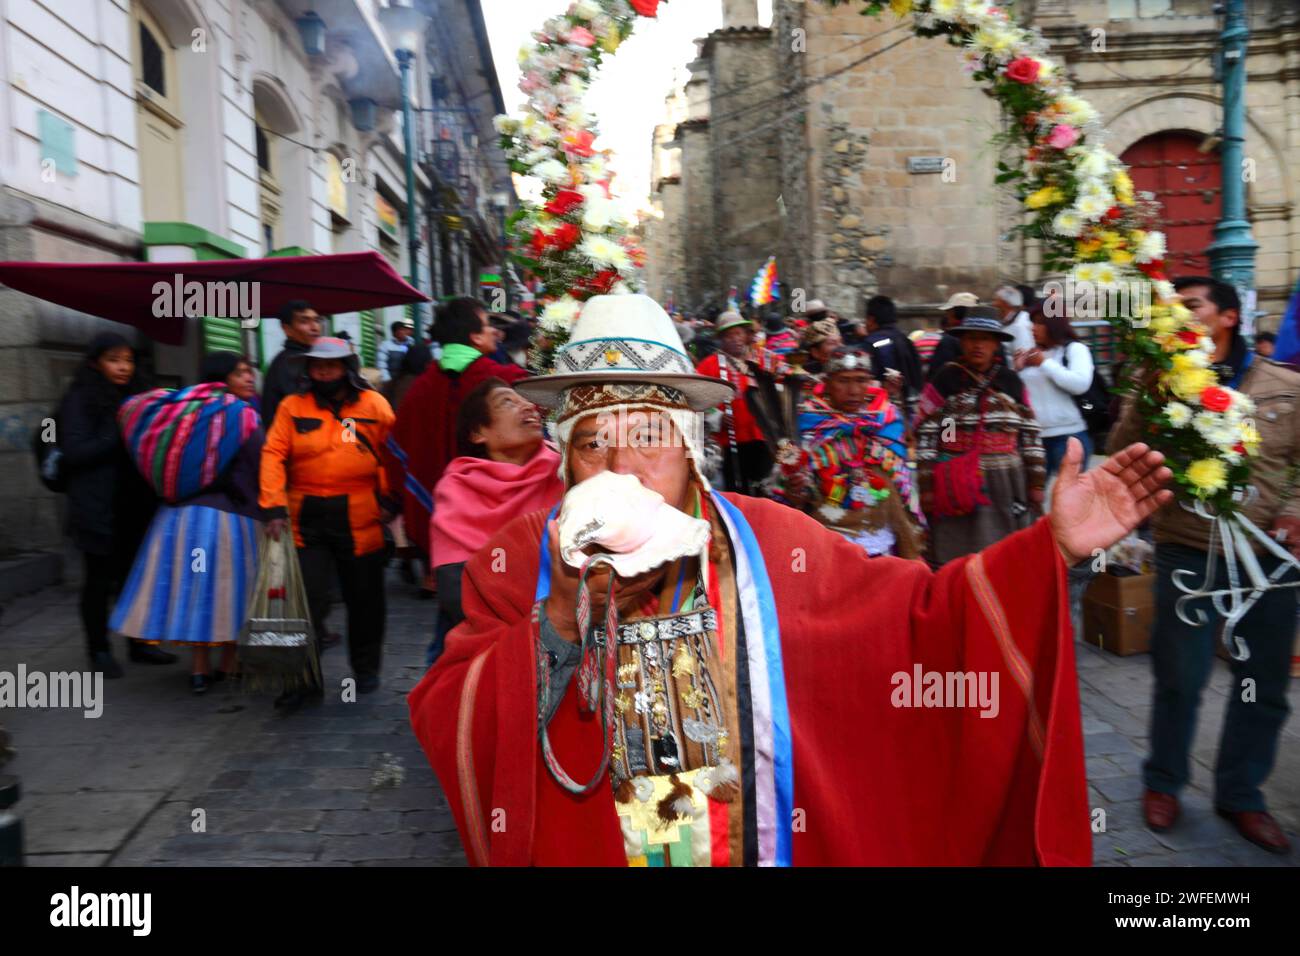 La Paz, BOLIVIA; 24th January 2015. An Aymara shaman blows a conch shell as he walks in front of an ancient illa (or statue) of an Ekeko (an Aymara god of abundance) as it is paraded through the streets of La Paz to celebrate its first appearance at the Alasitas festival, which starts today. The statue is around 2000 years old and was made by the Pucara culture. It was taken from the archaeological site of Tiwanaku to Switzerland in 1858, and returned to Bolivia by the Berne History Museum in November 2014. On the right is part of San Francisco church. Stock Photo